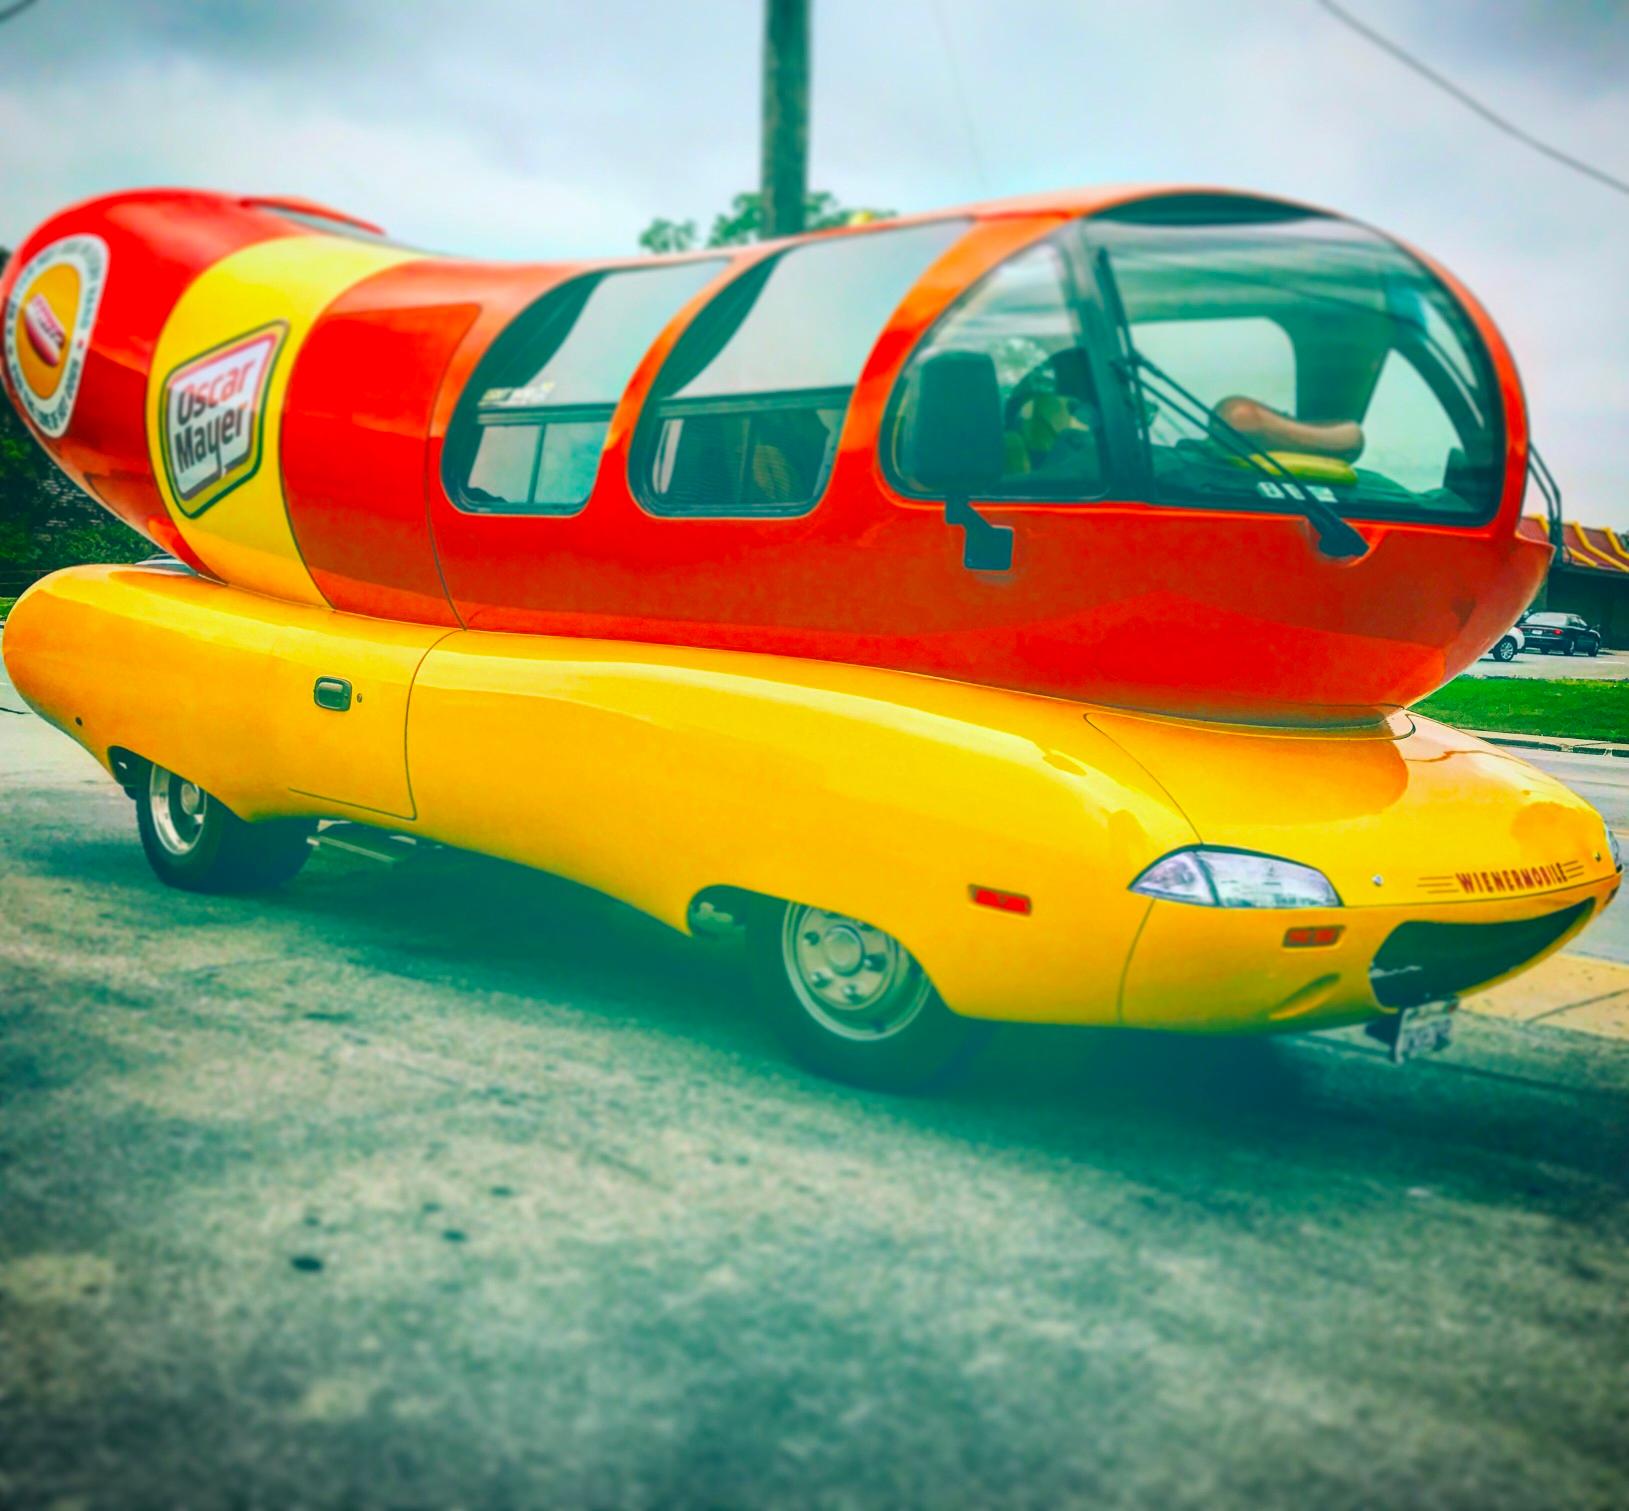 The Oscar Mayer Wienermobile in all its glory.